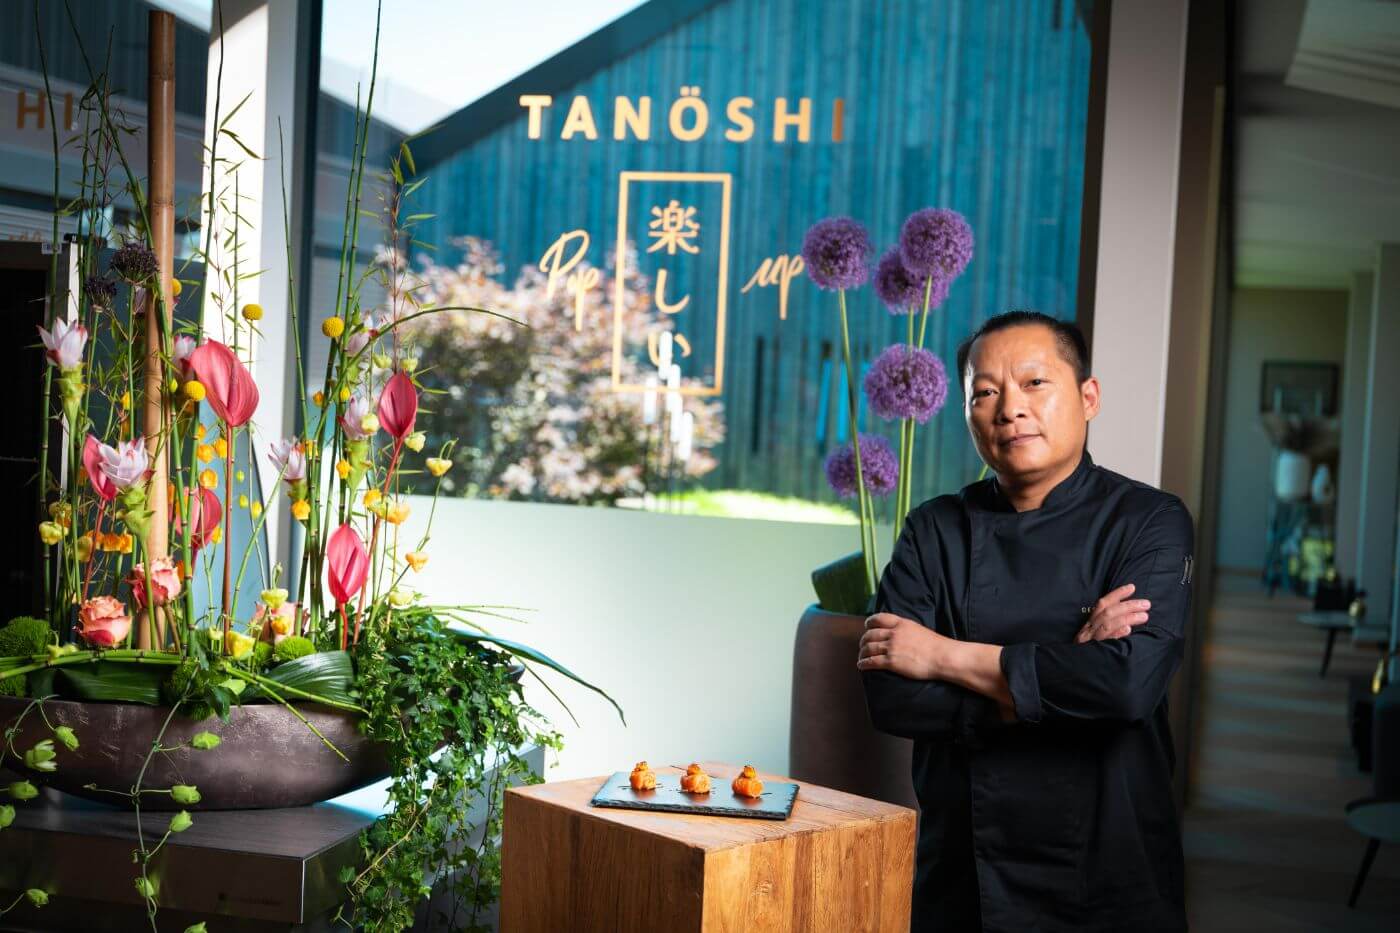 tanöshi chef on the inauguration day of the sushi restaurant in Donaueschingen